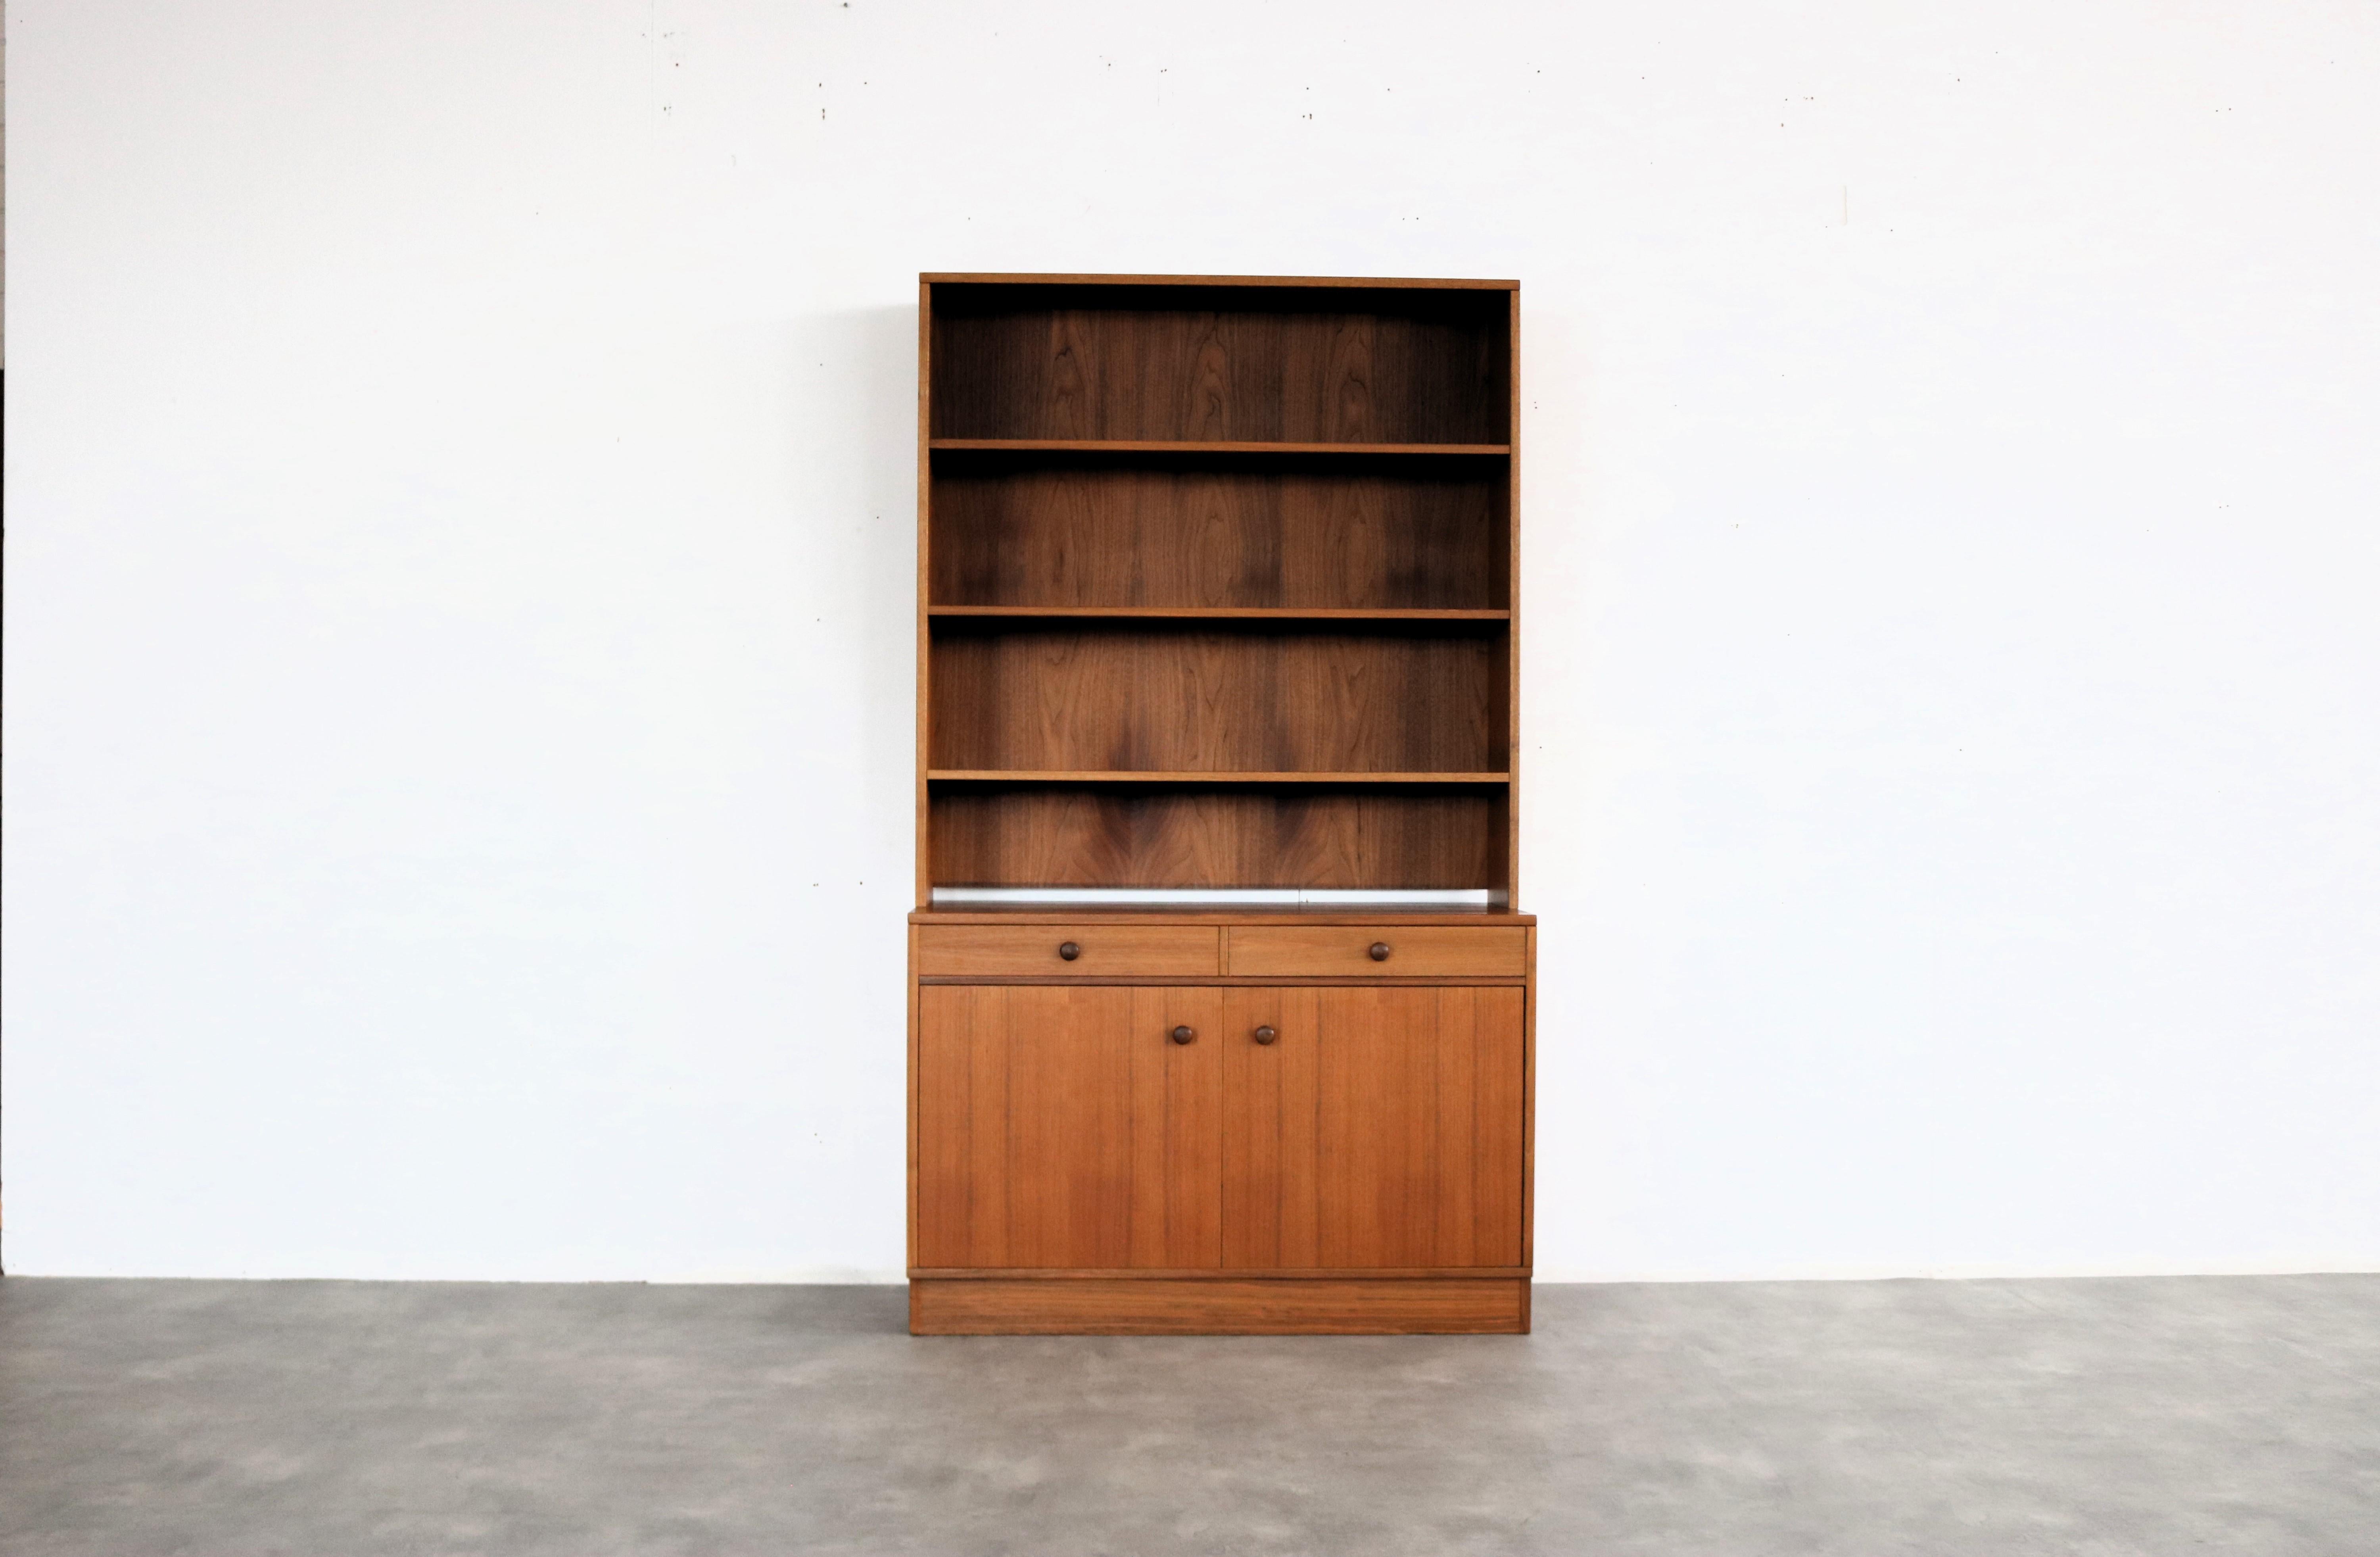 vintage bookcases | wall cupboard | 60s | Sweden

period | 60's
design | unknown | Sweden
condition | good | light signs of use
size | 181 x 105 x 42 (hxwxd)

details | teak; 2 available; prices per piece;

article number | 2169